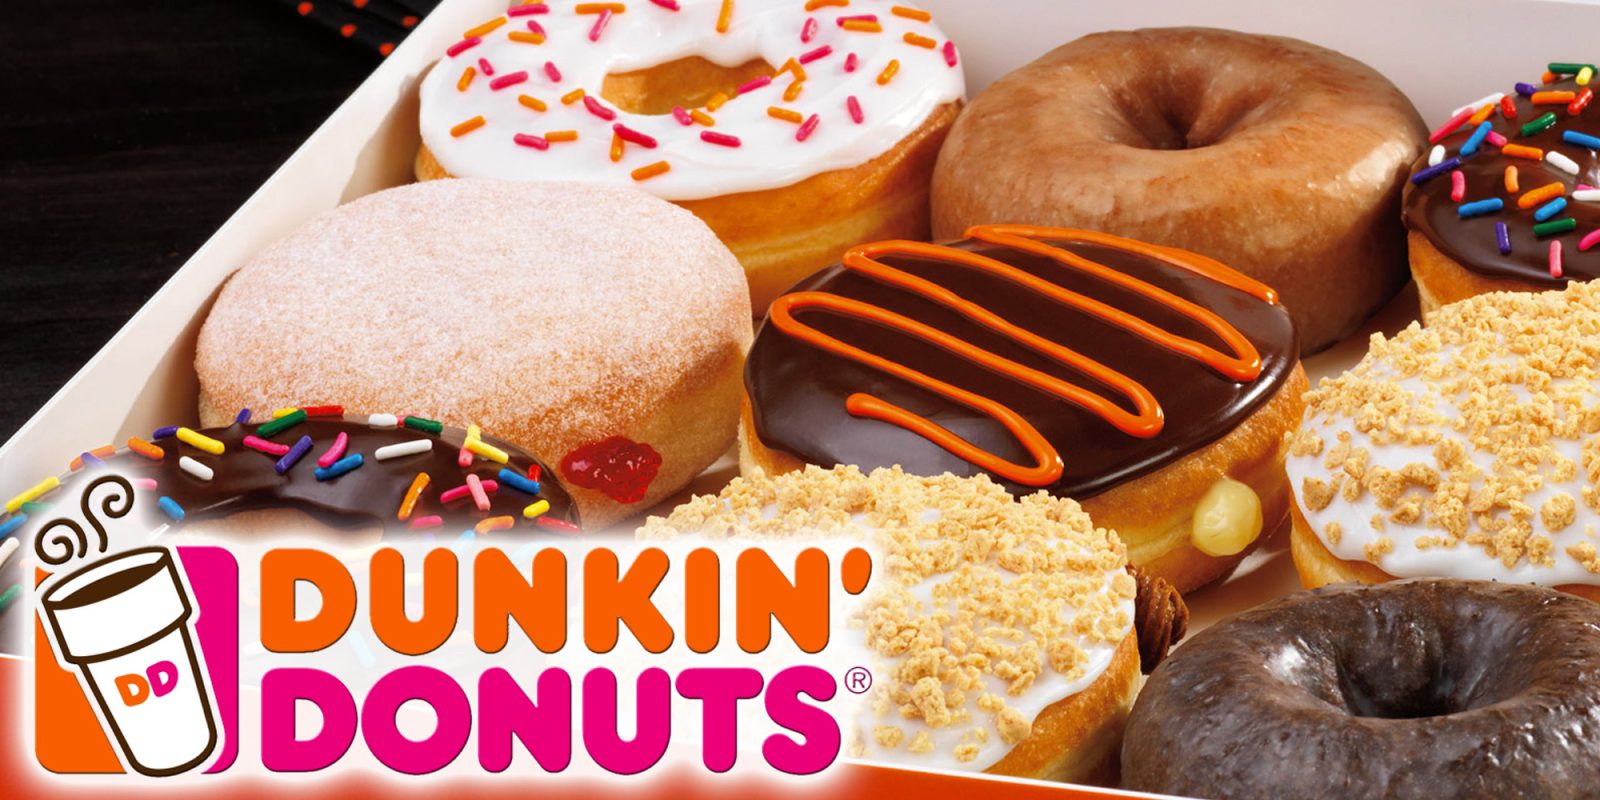 Get a 10 Bonus Credit from Dunkin' Donuts when you buy